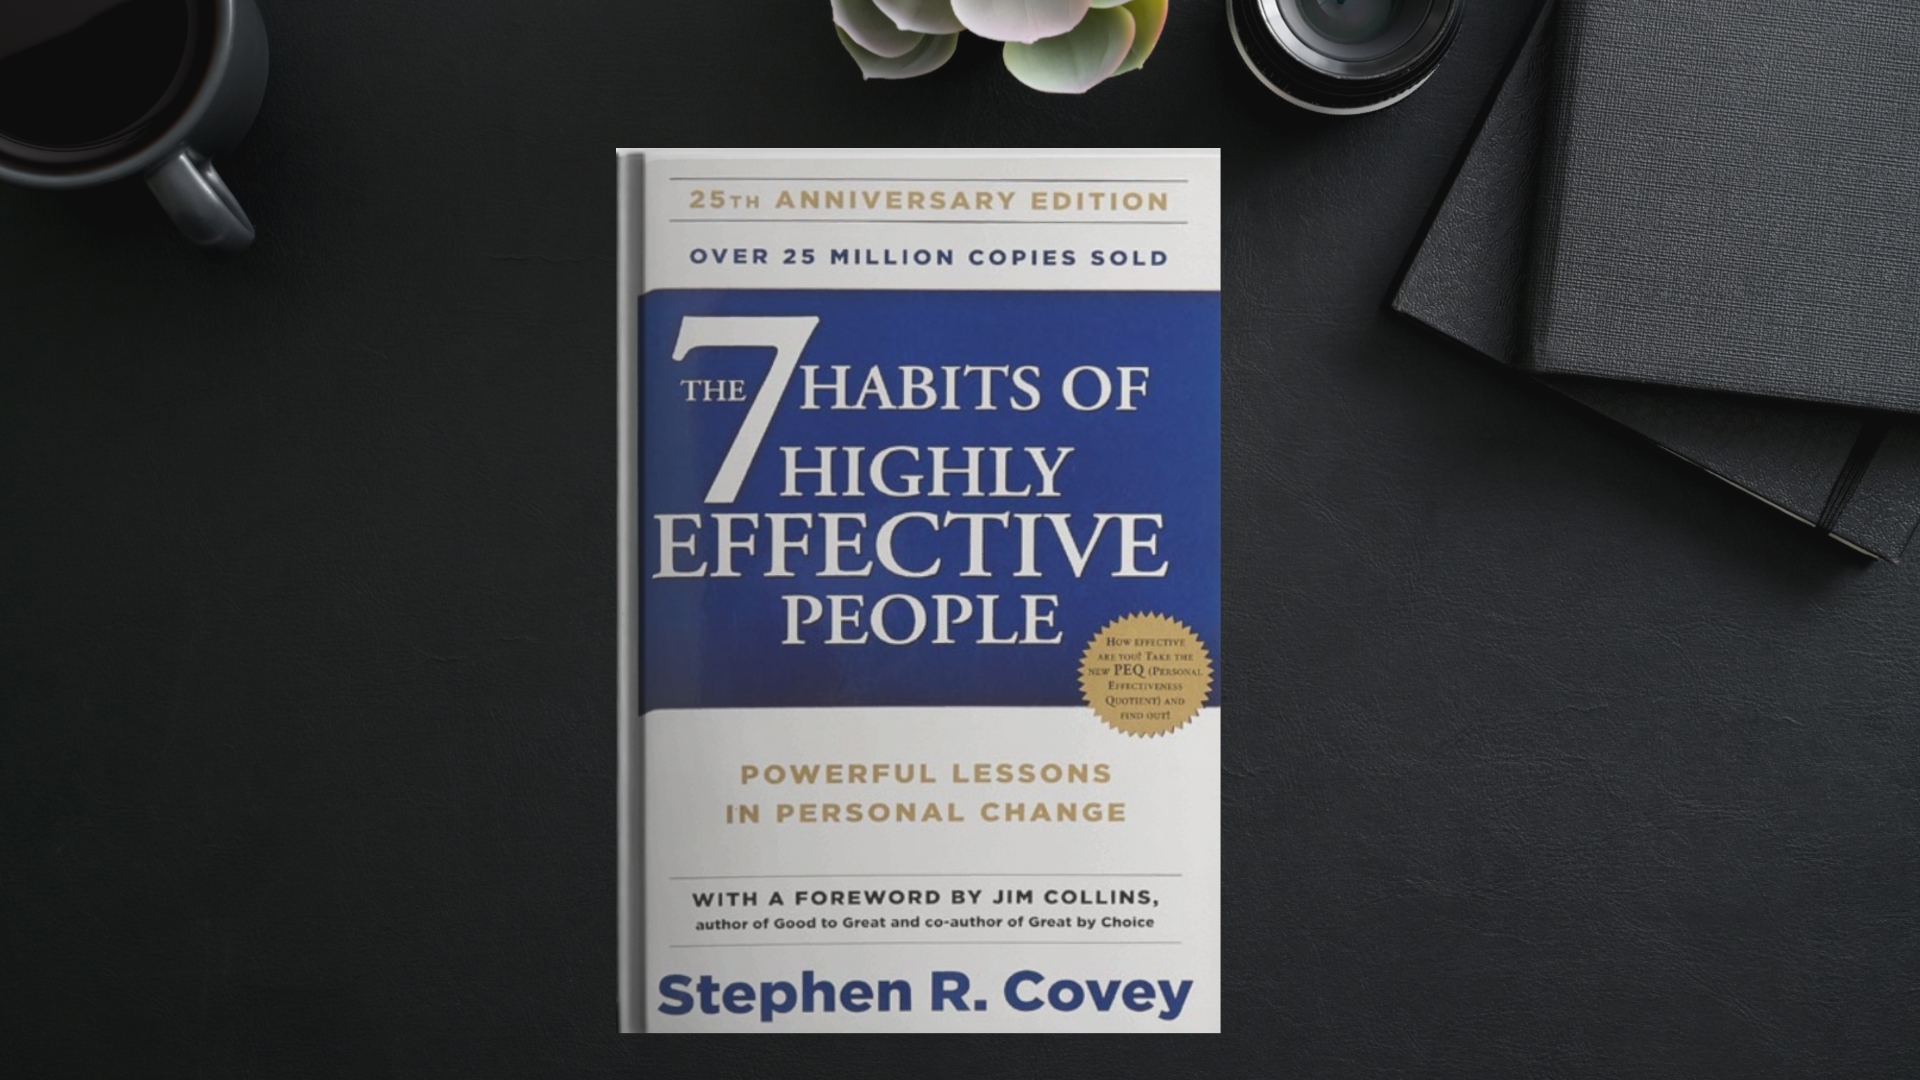 7 habits of highly effect people book